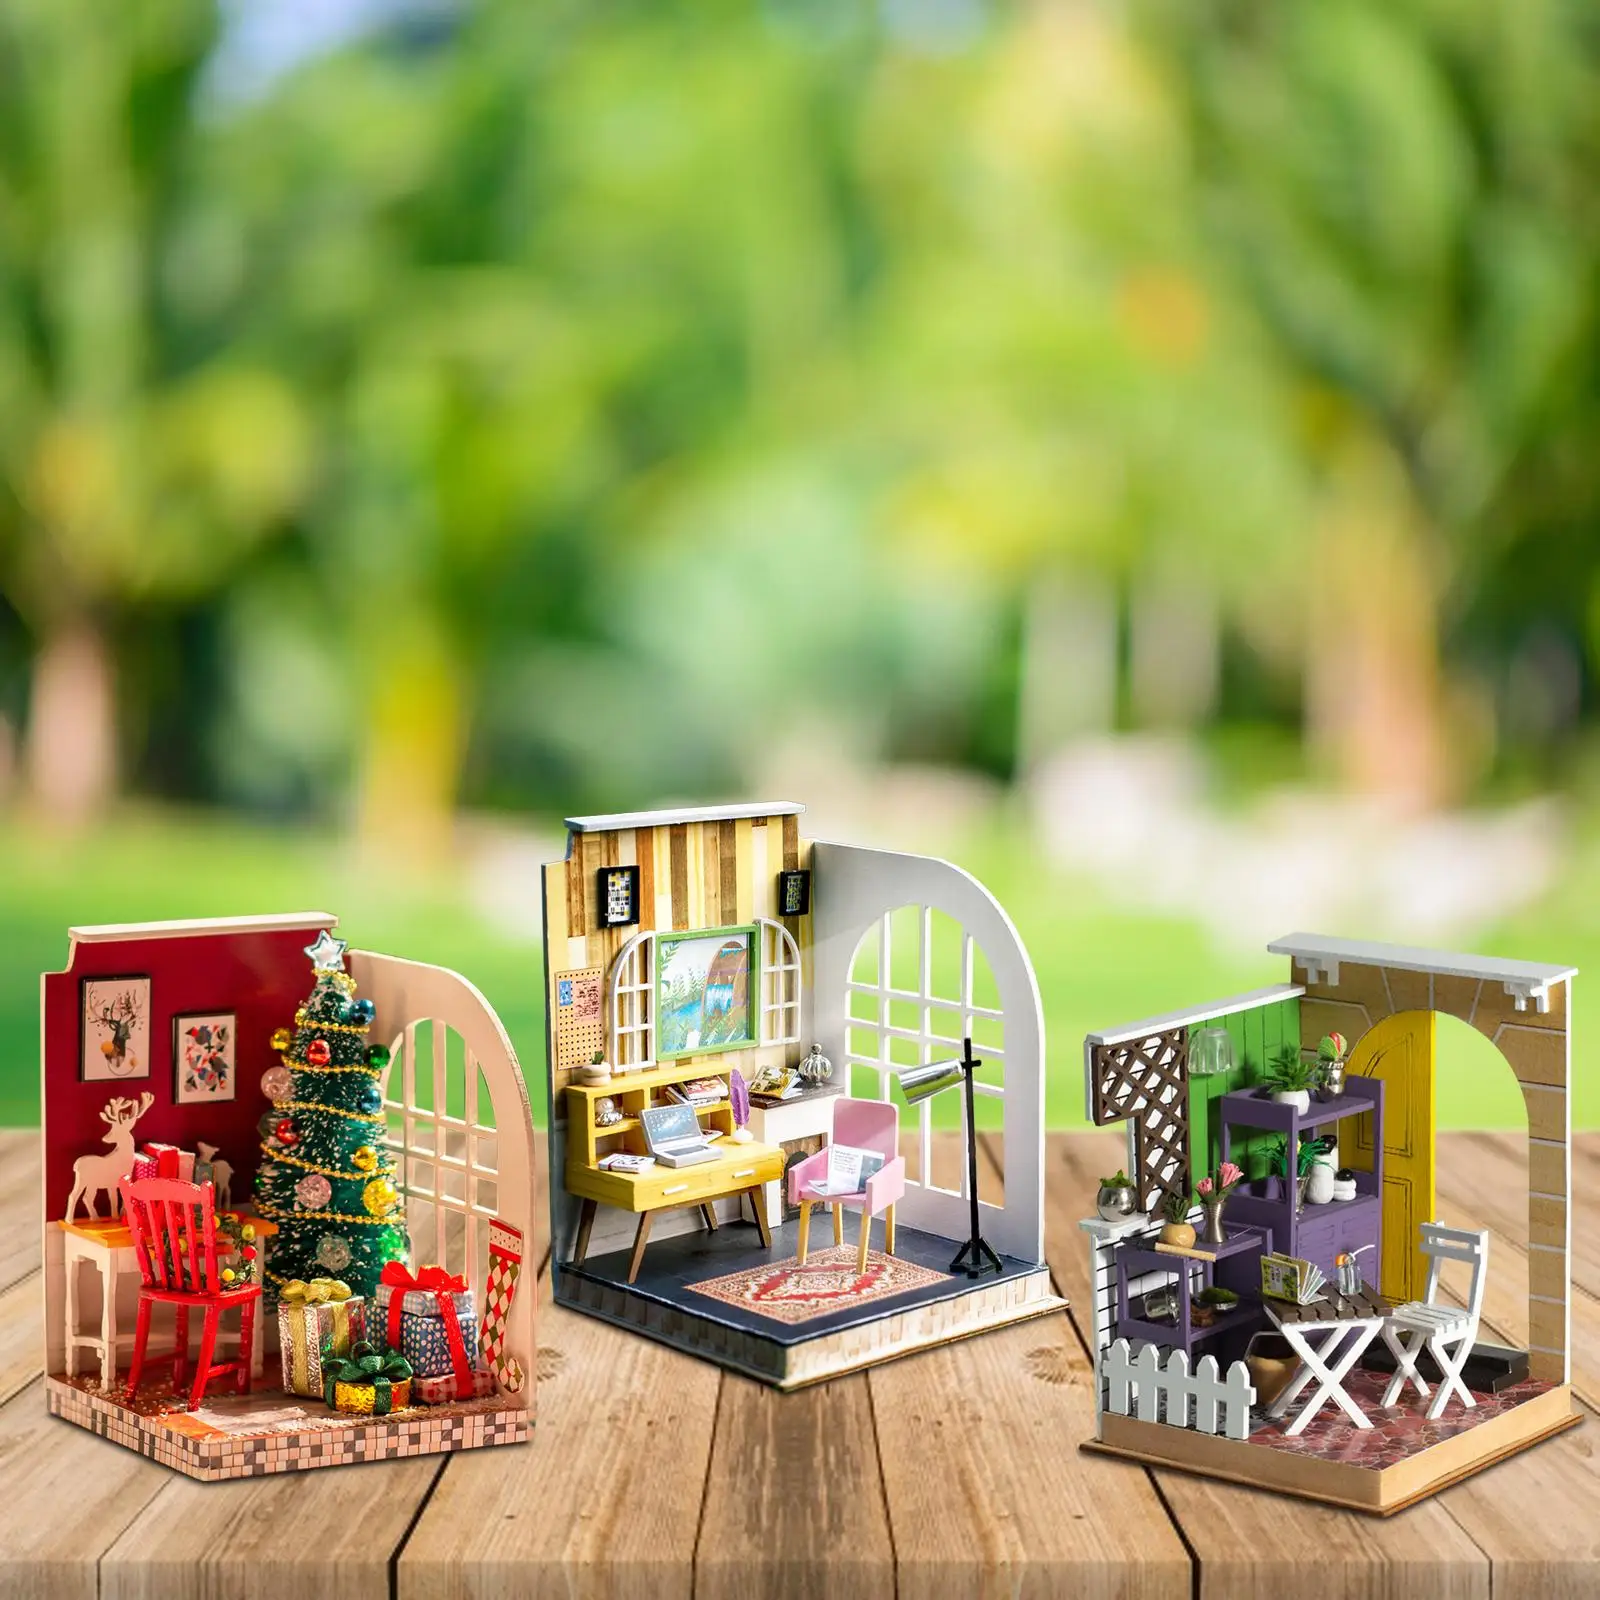 Wooden DIY Miniature Dollhouse Toy 3D Building Puzzle Home Decor for Adults Kids Girls Boys Children Birthday Gift